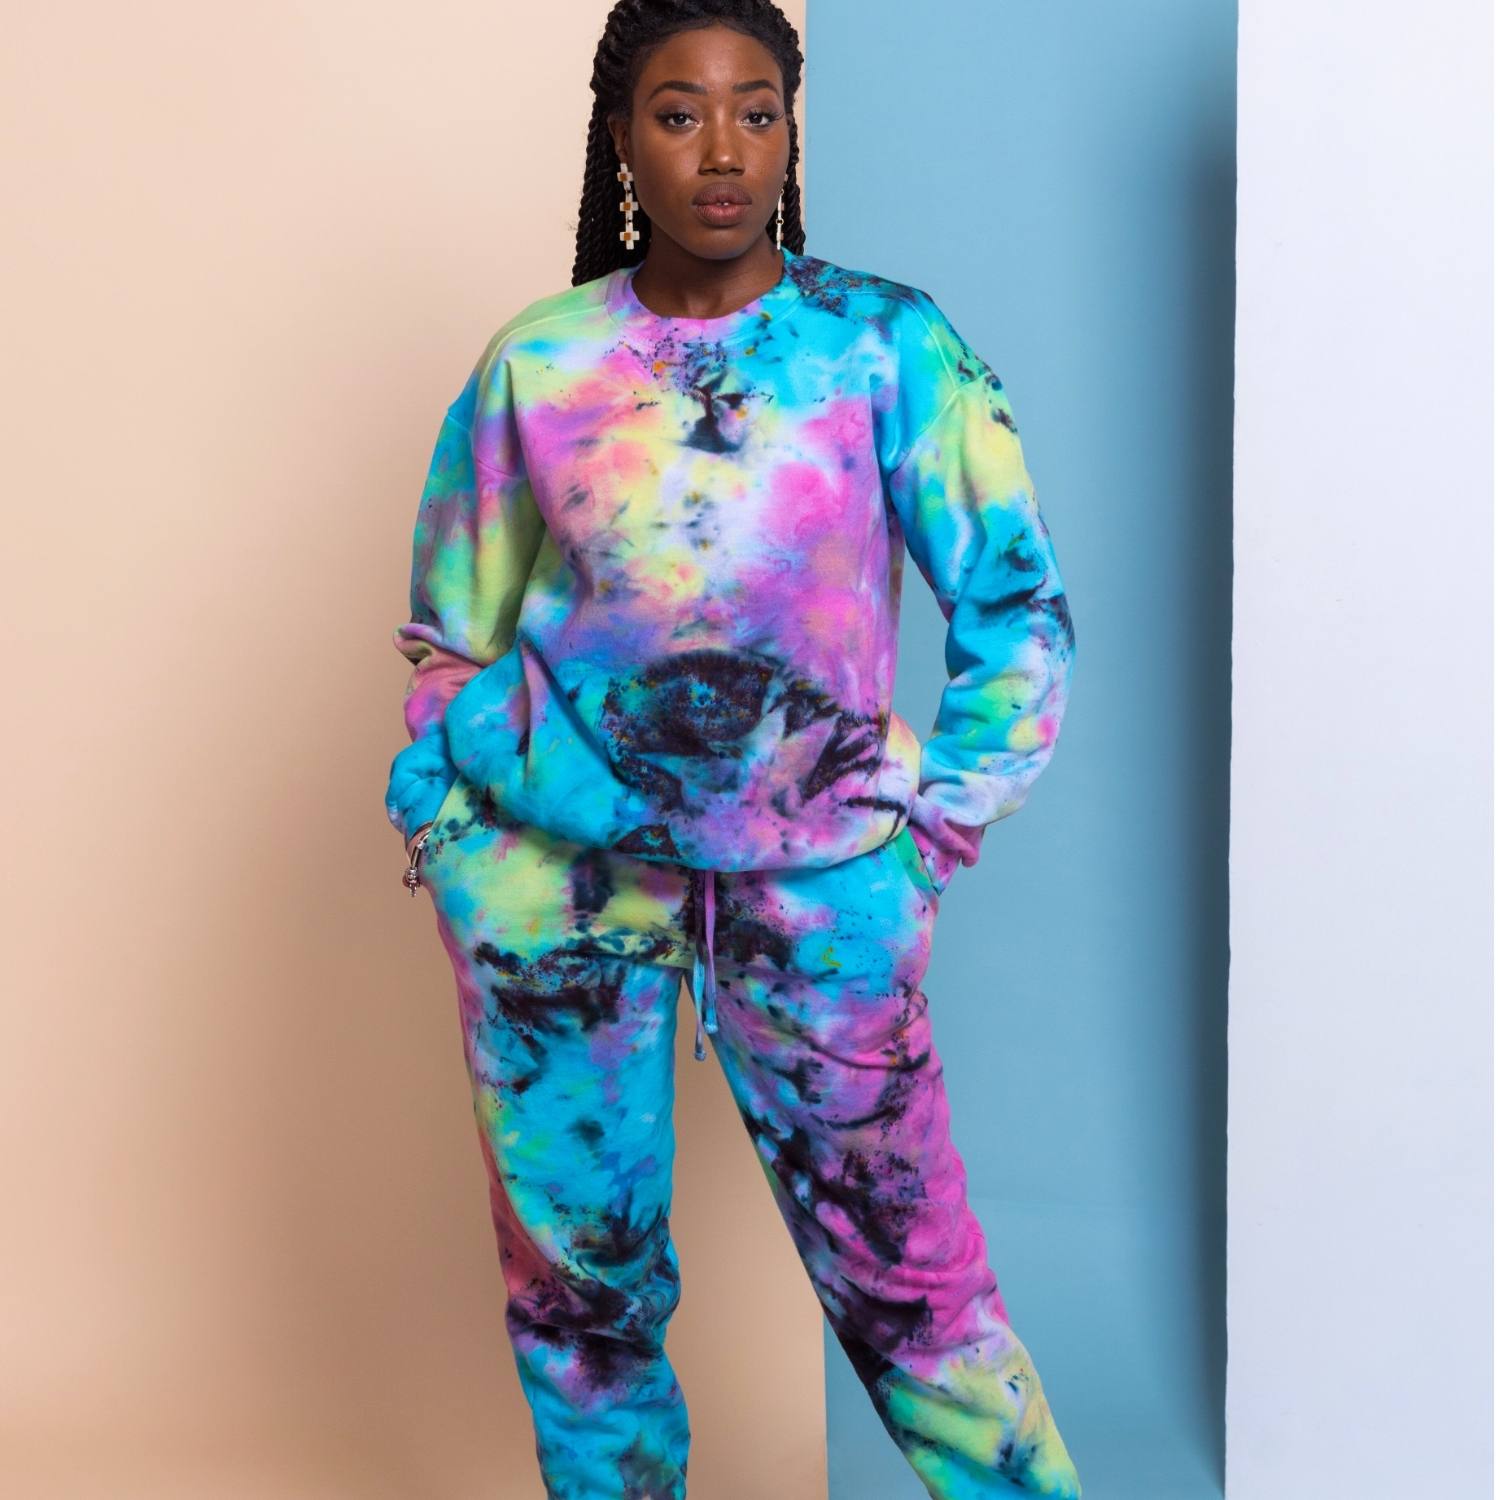 http://mashaapparel.com/cdn/shop/files/Woman-standing-in-bright-tie-dye-sweatsuit-hands-in-pockets-two-tone-blue-pink-background.jpg?v=1706038949